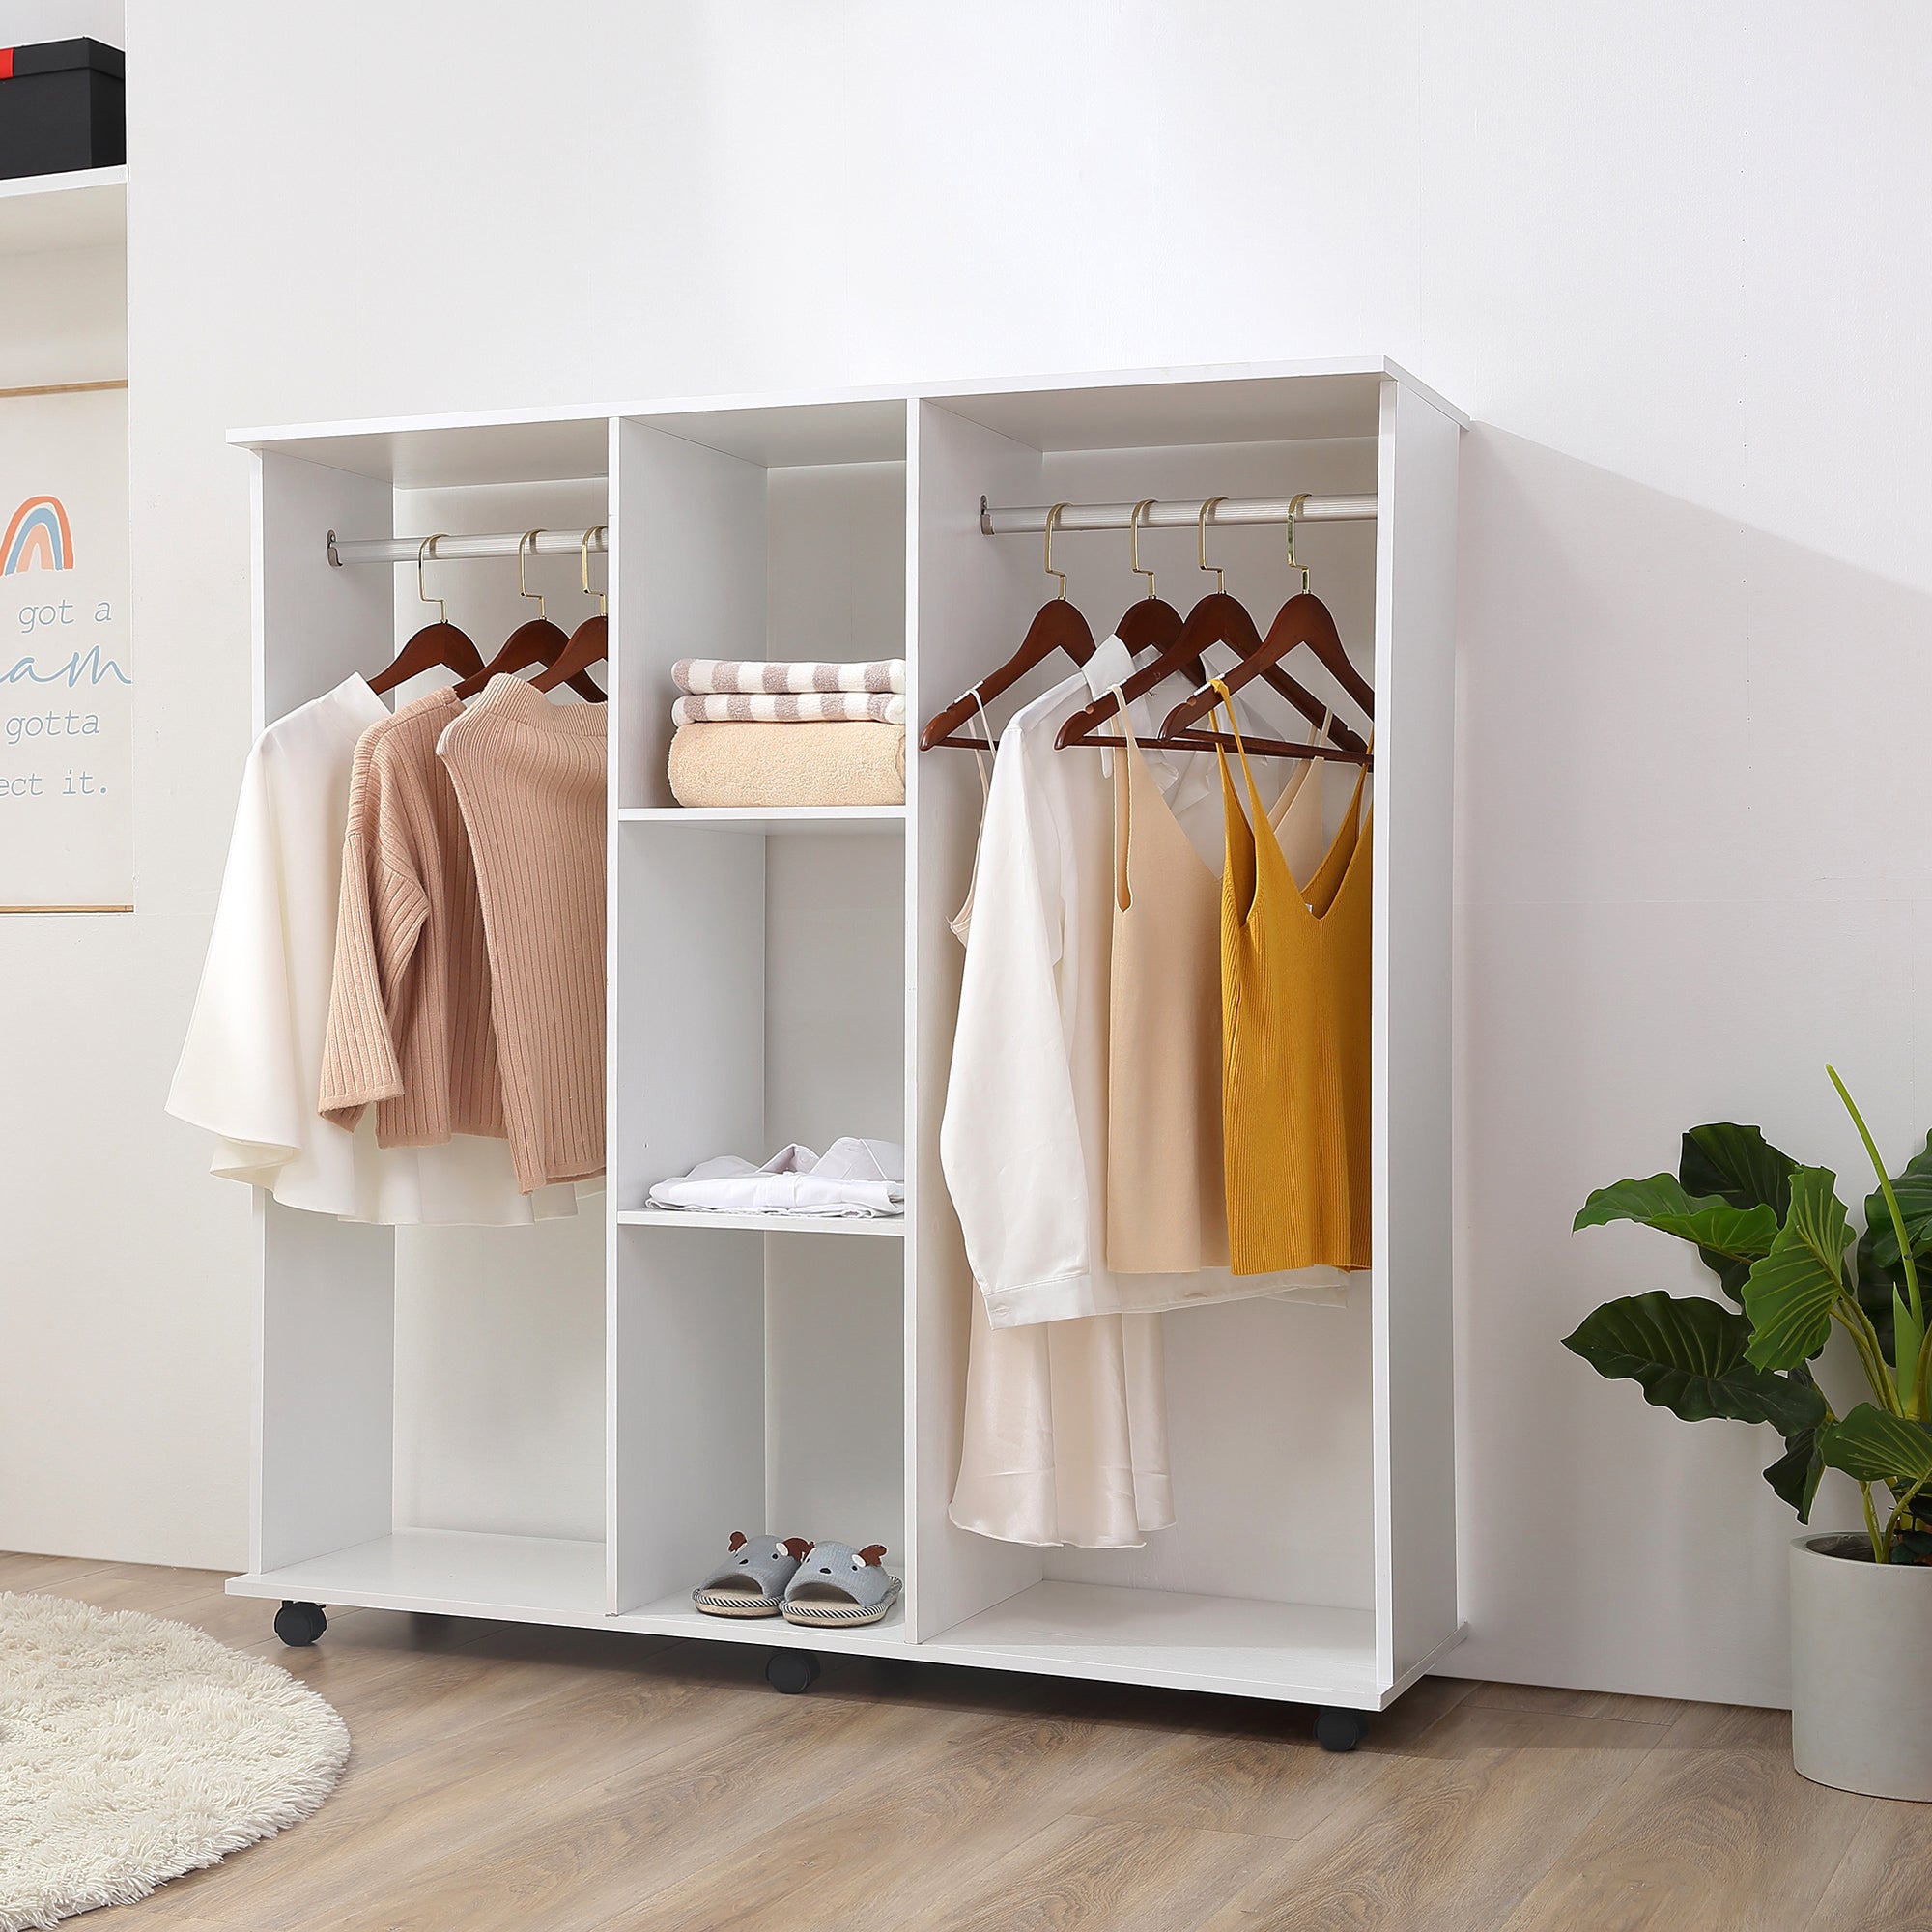 Double Mobile Open Wardrobe With Clothes Hanging Rails Storage Shelves Organizer Bedroom Furniture - White-1